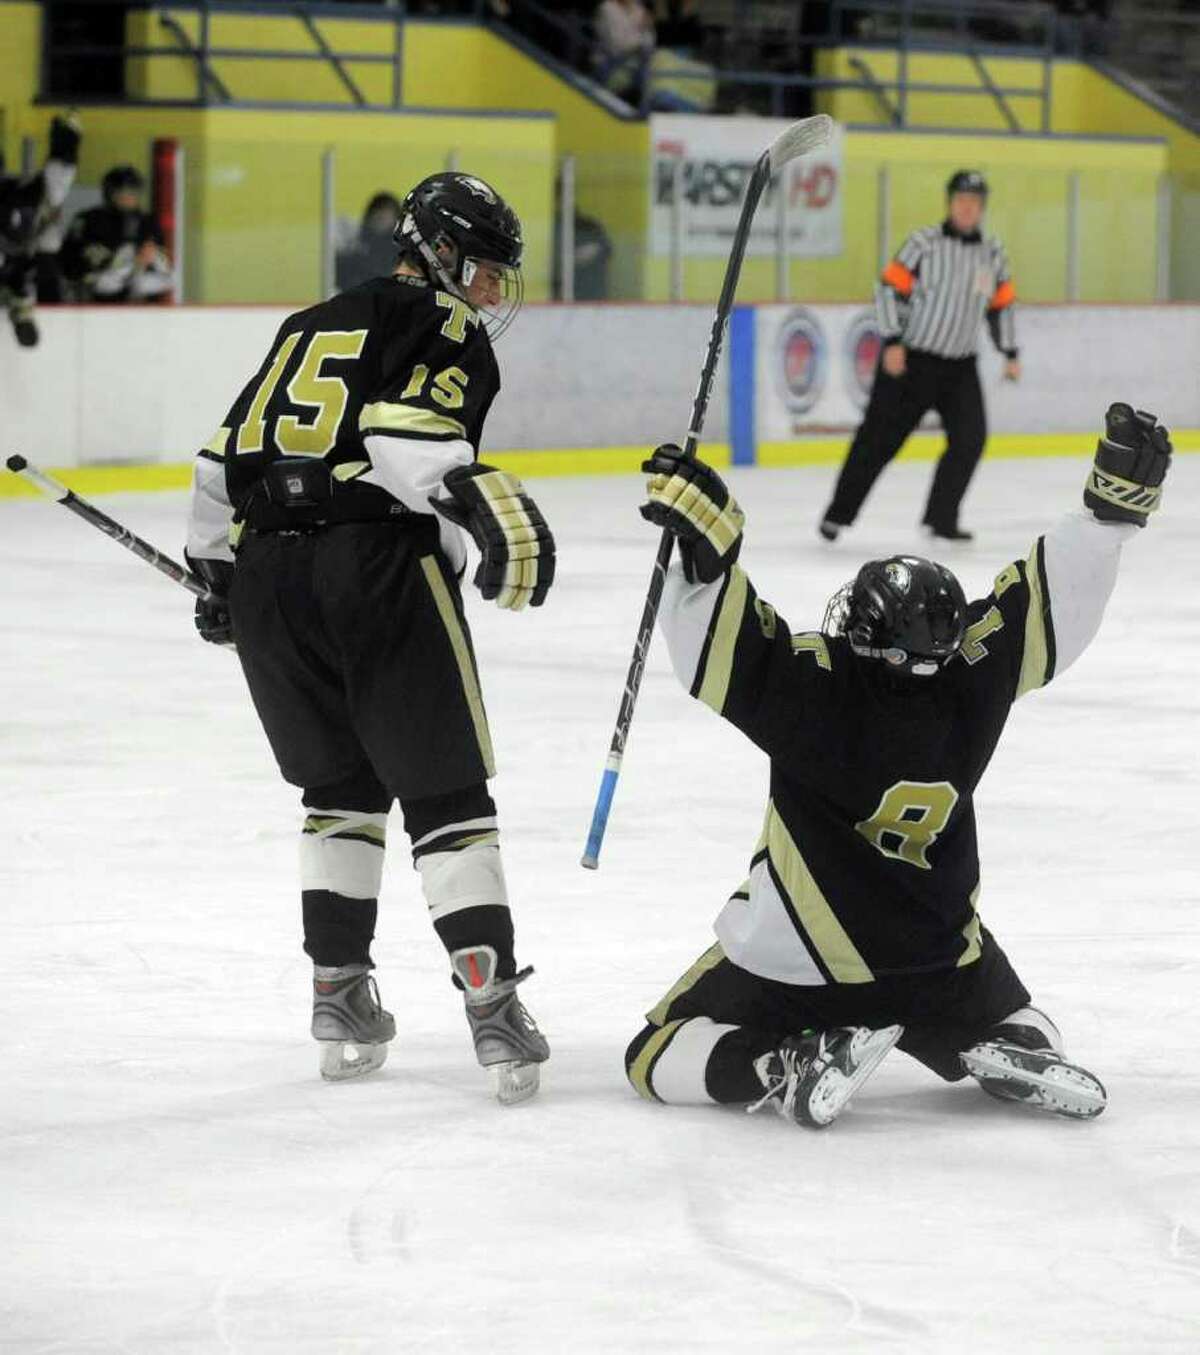 Trumbull's Michael Ahearn, left, and Brendan Strobel, right, celebrate a goal during Saturday's FCIAC Teir II Boys Hockey Final at Terry Conners Rink in Stamford on March 3, 2012.